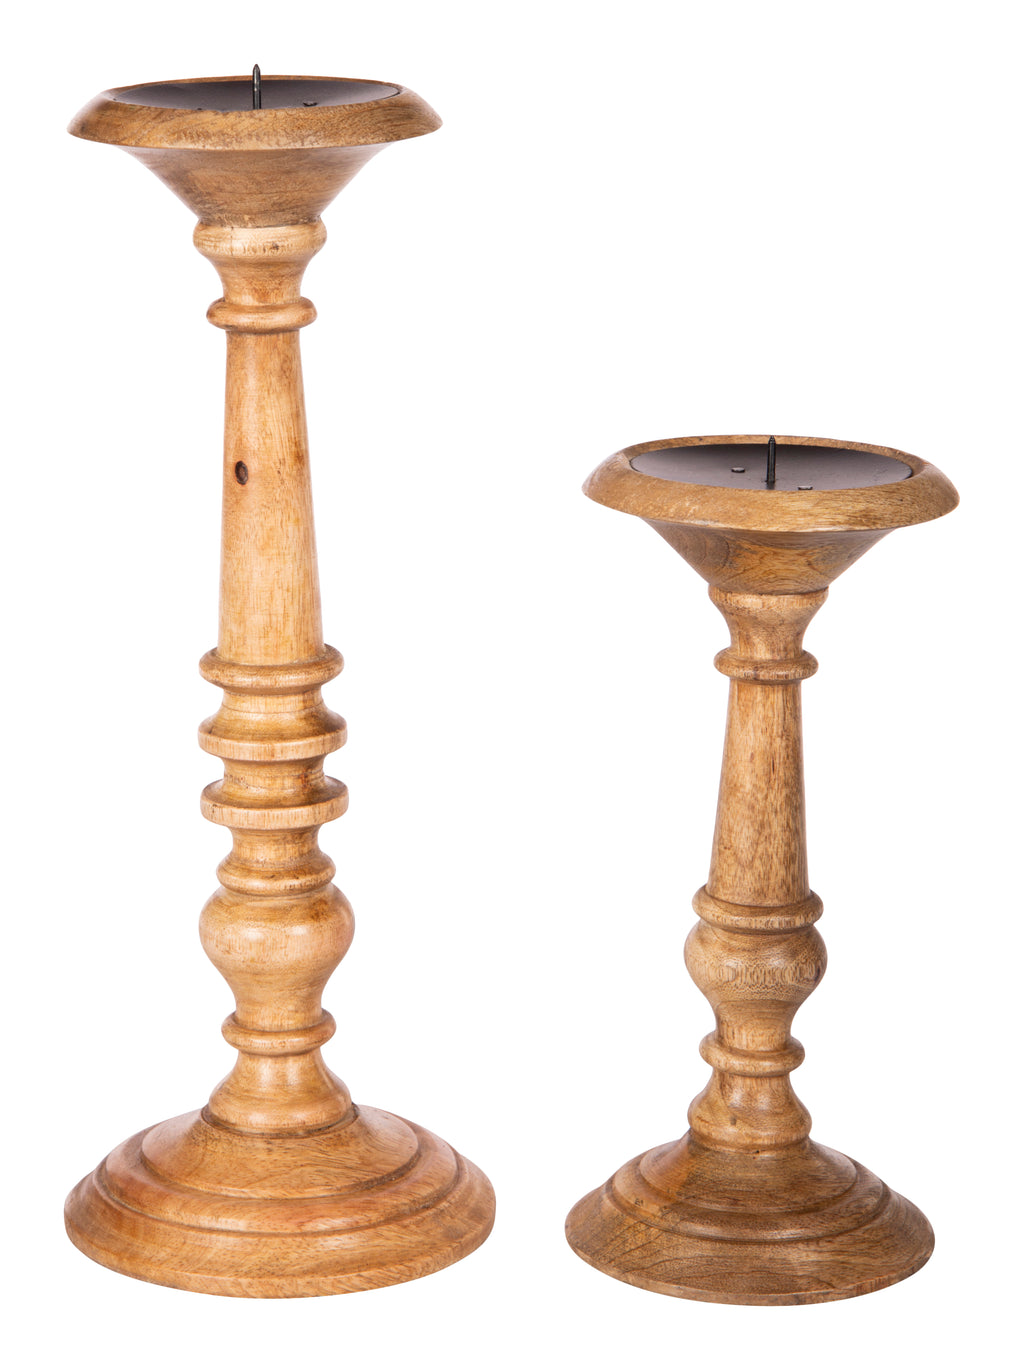 Anything & Everything Handmade Wooden Candle Holder Stand for Home Decor on Christmas and Diwali (Set of 2) - Natural